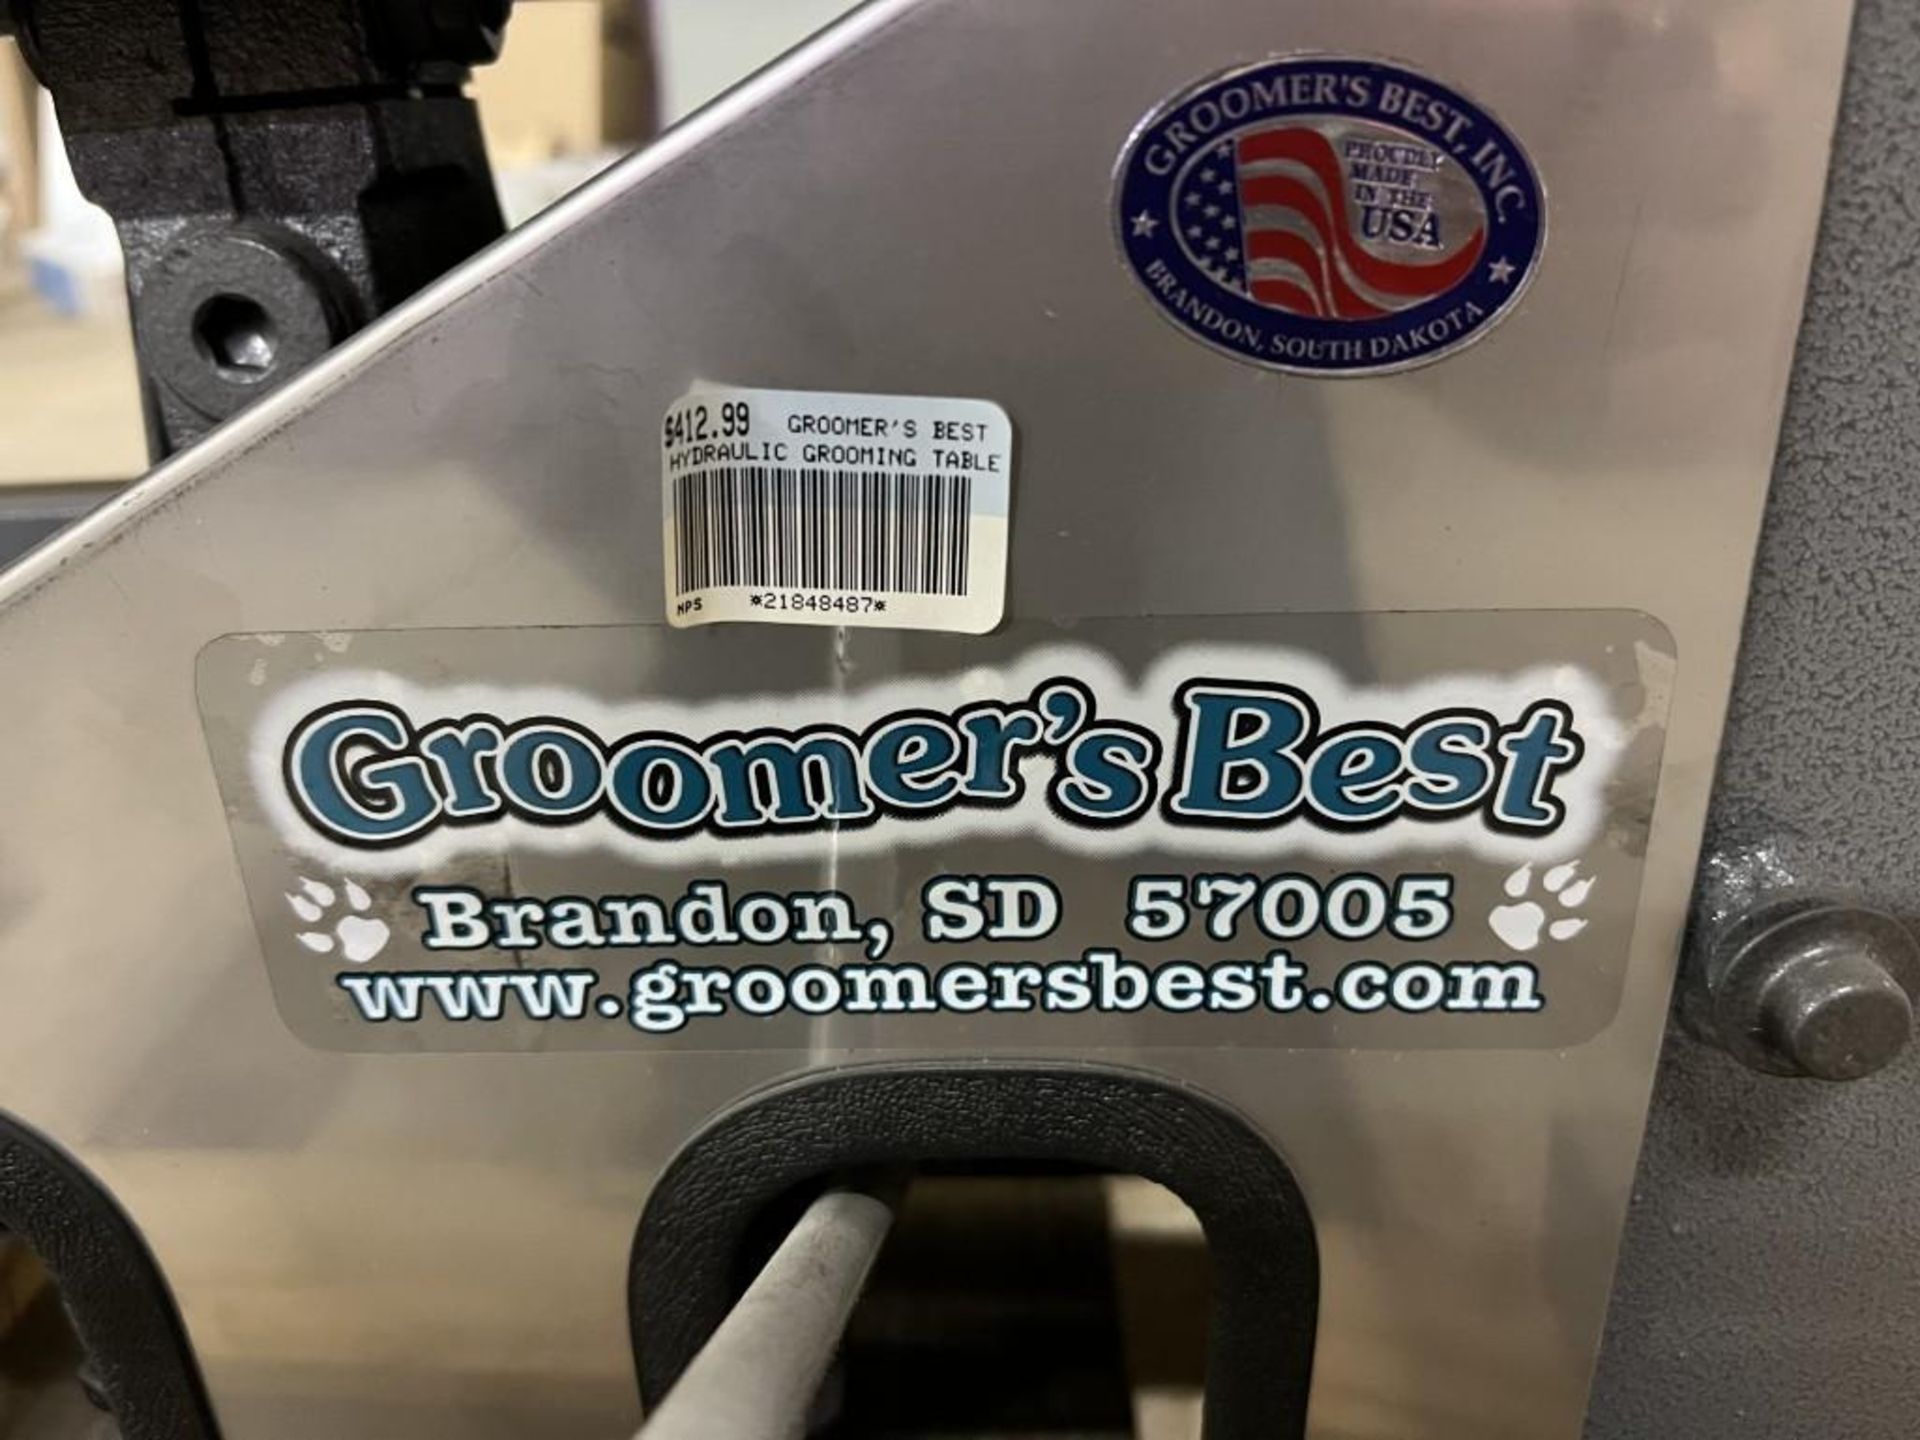 Groomer's Best Hydraulic Grooming Table (located offsite at: Located at: 3785 W 1987 S. SLC, UT 8410 - Image 2 of 2